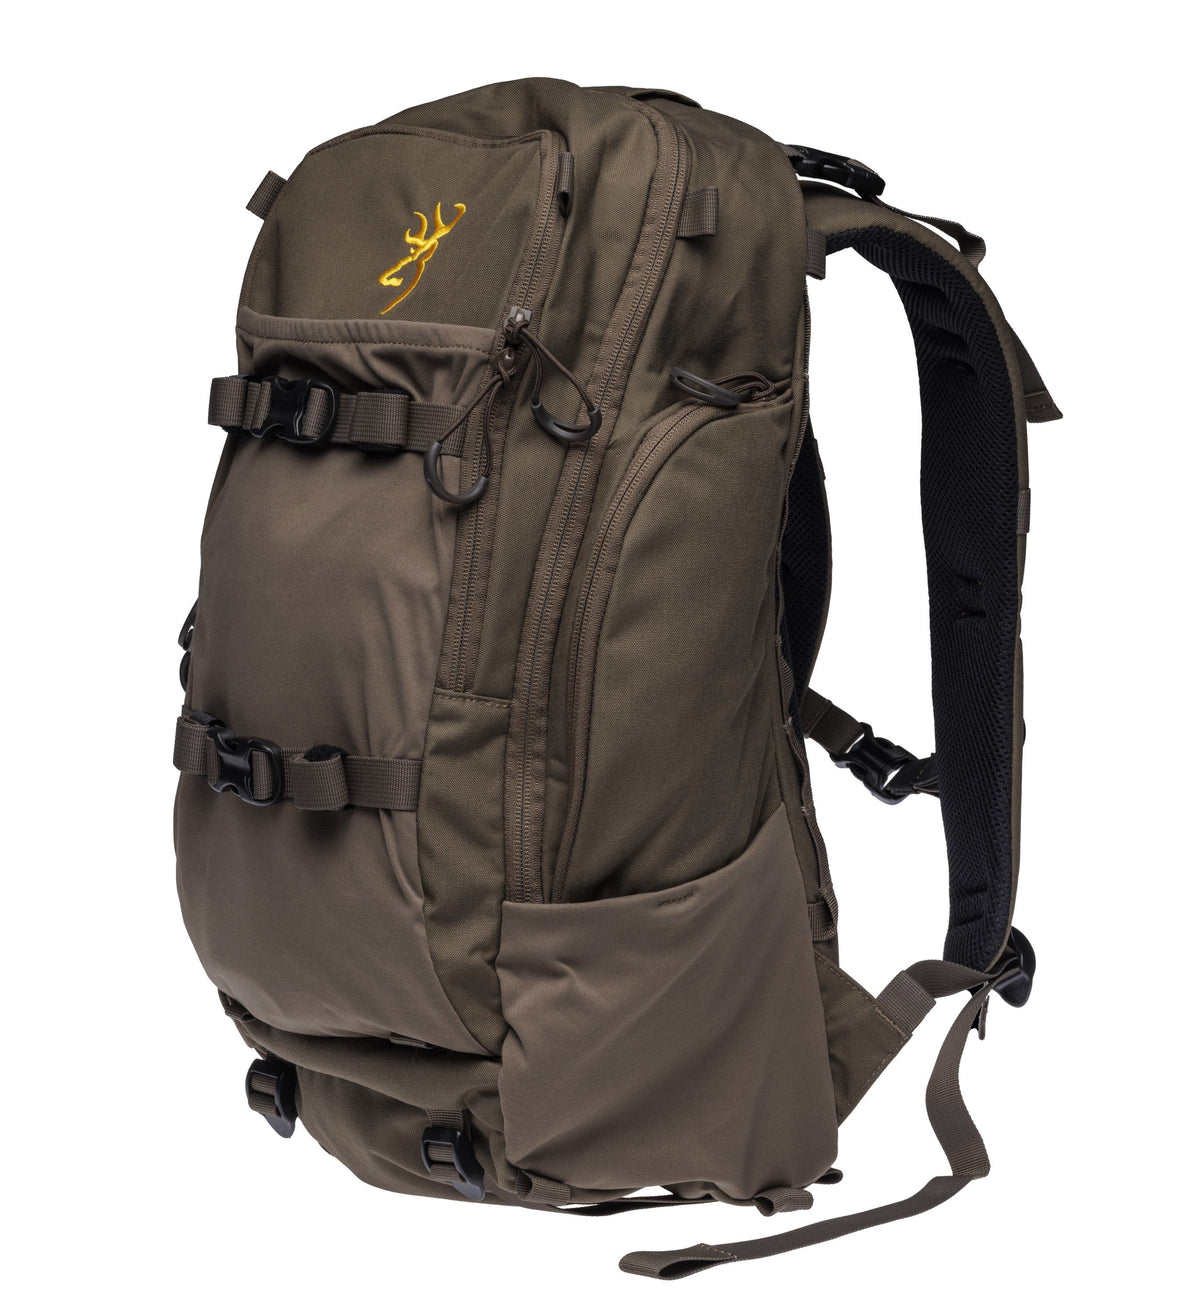 PACK, WHITETAIL 1300 MAJOR BROWN